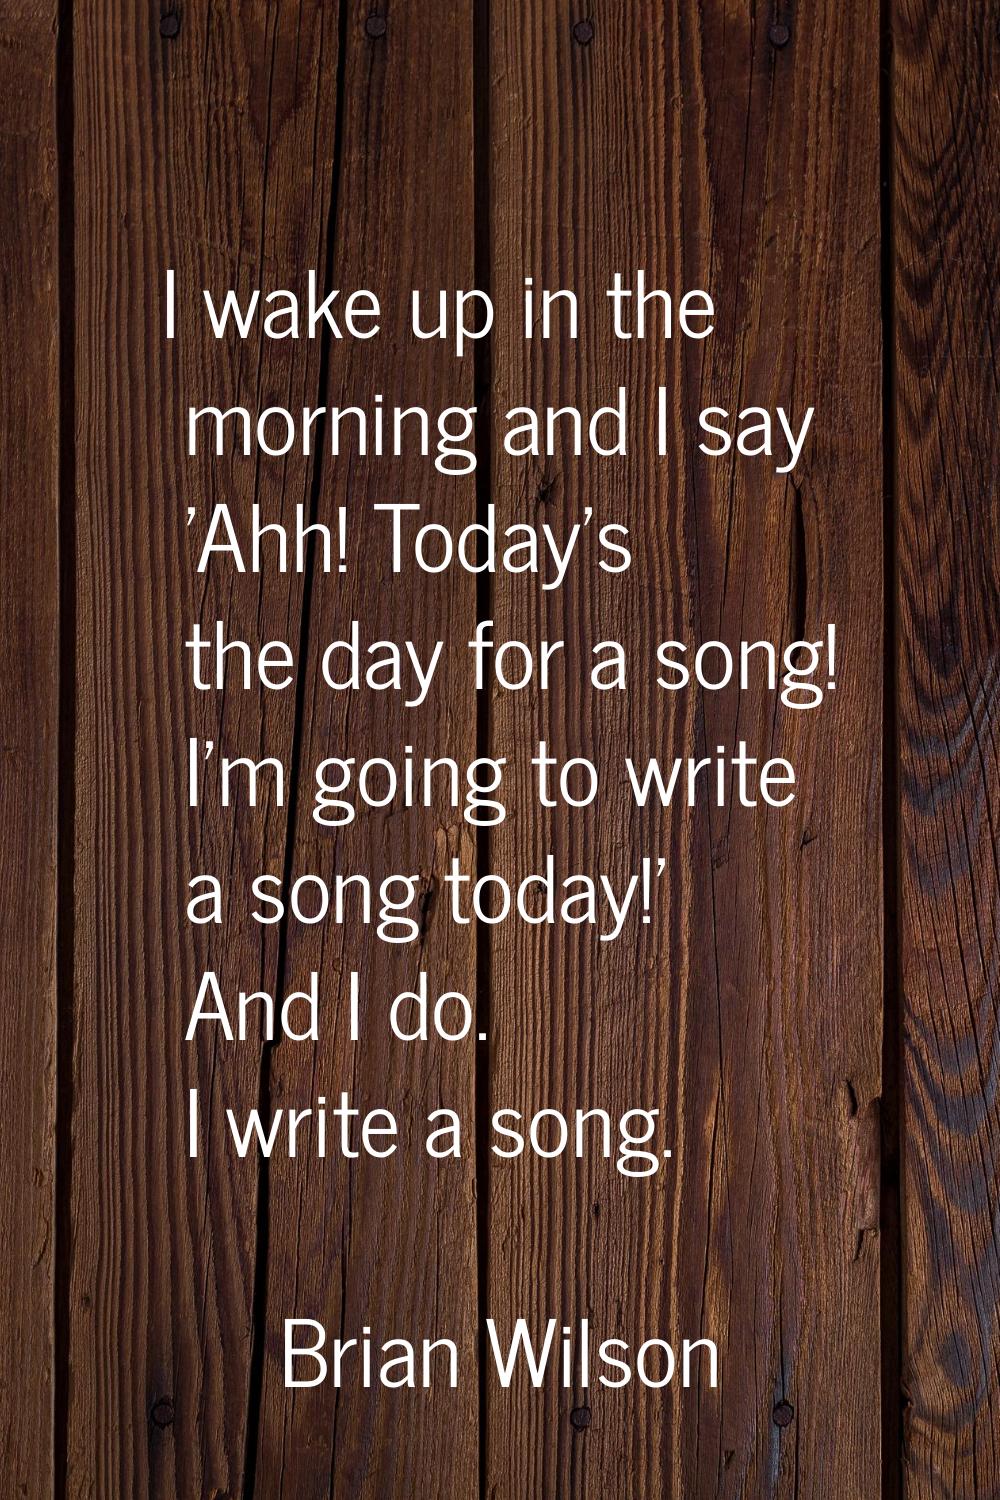 I wake up in the morning and I say 'Ahh! Today's the day for a song! I'm going to write a song toda